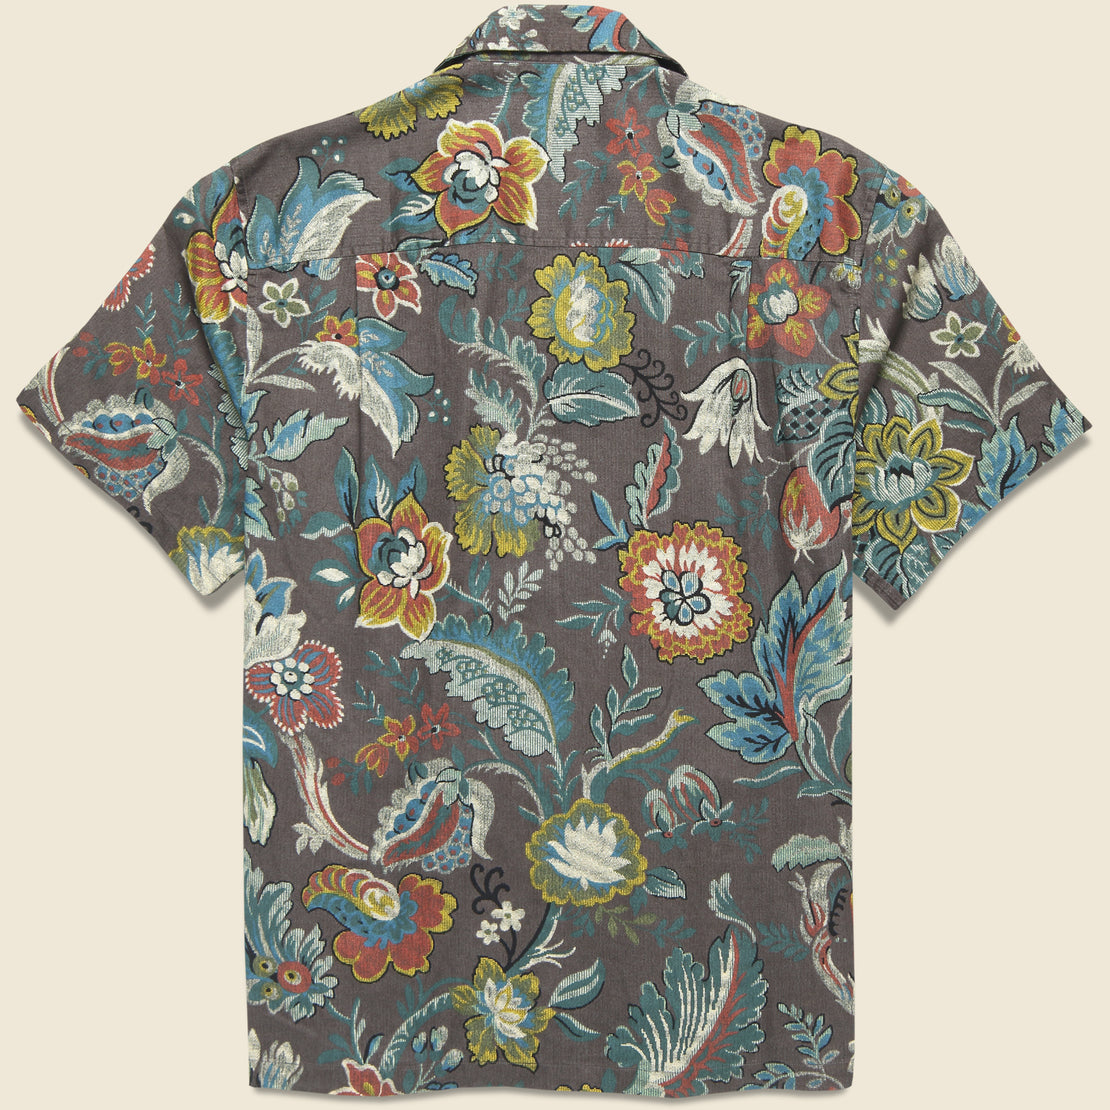 Panama Botanical Shirt - Brown - Knickerbocker - STAG Provisions - Tops - S/S Woven - Floral